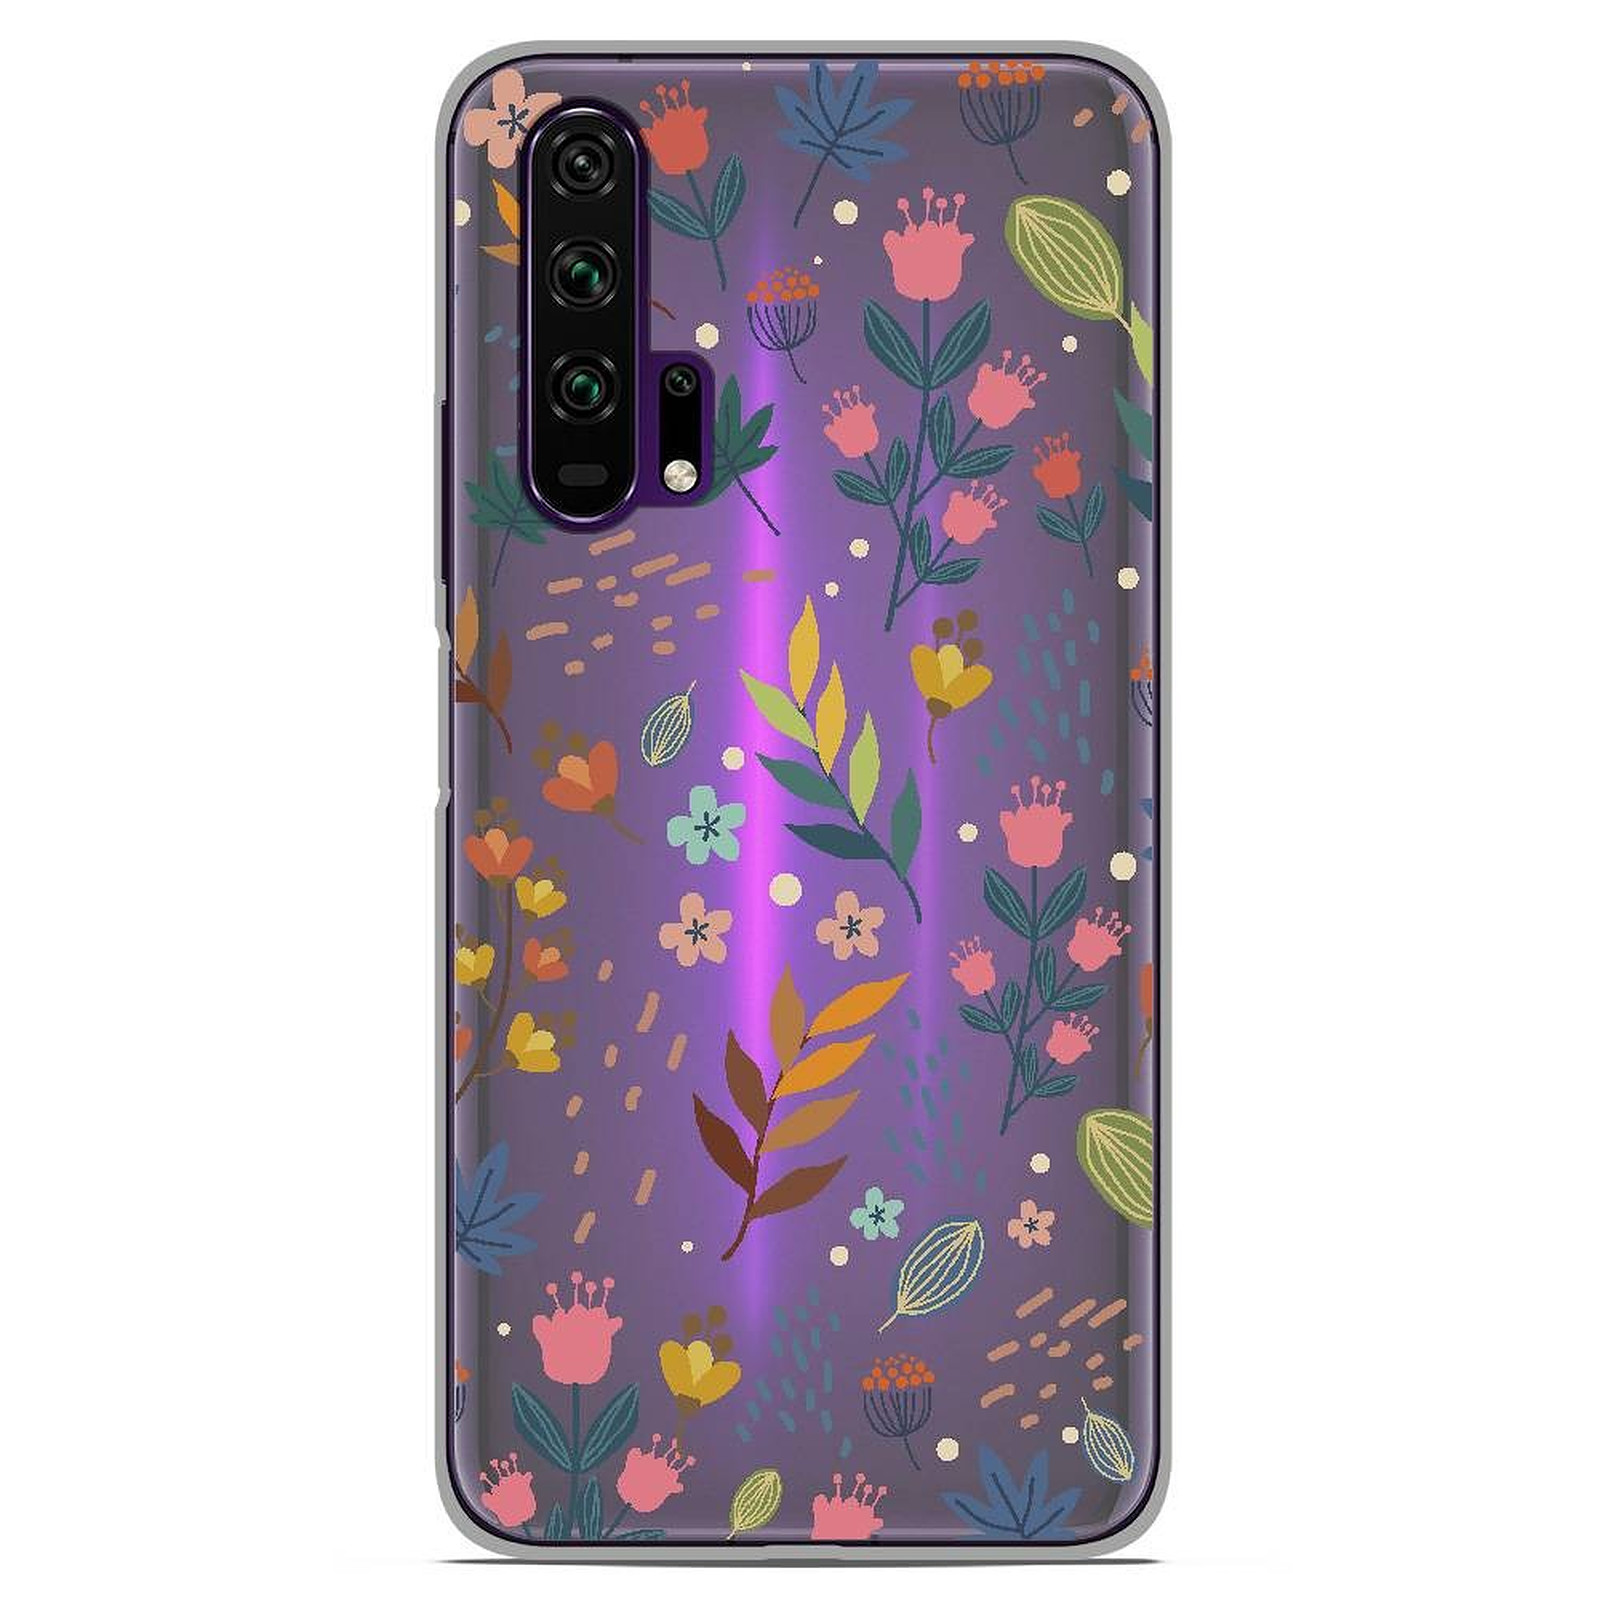 1001 Coques Coque silicone gel Huawei Honor 20 Pro motif Fleurs colorees - Coque telephone 1001Coques